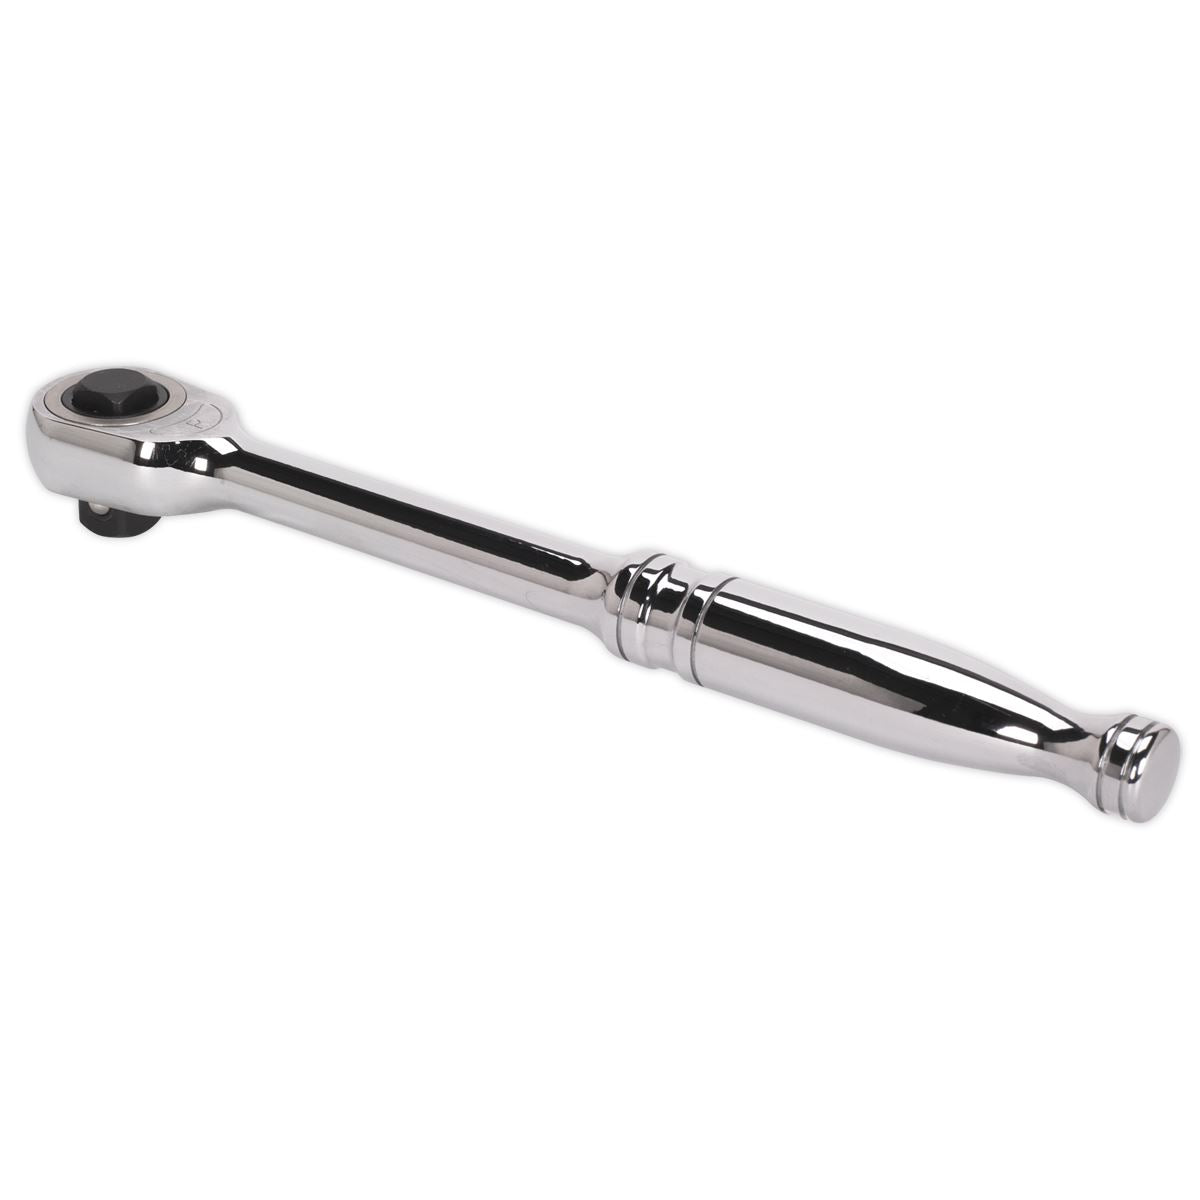 Sealey Premier Gearless Ratchet Wrench 1/2"Sq Drive - Push-Through Reverse